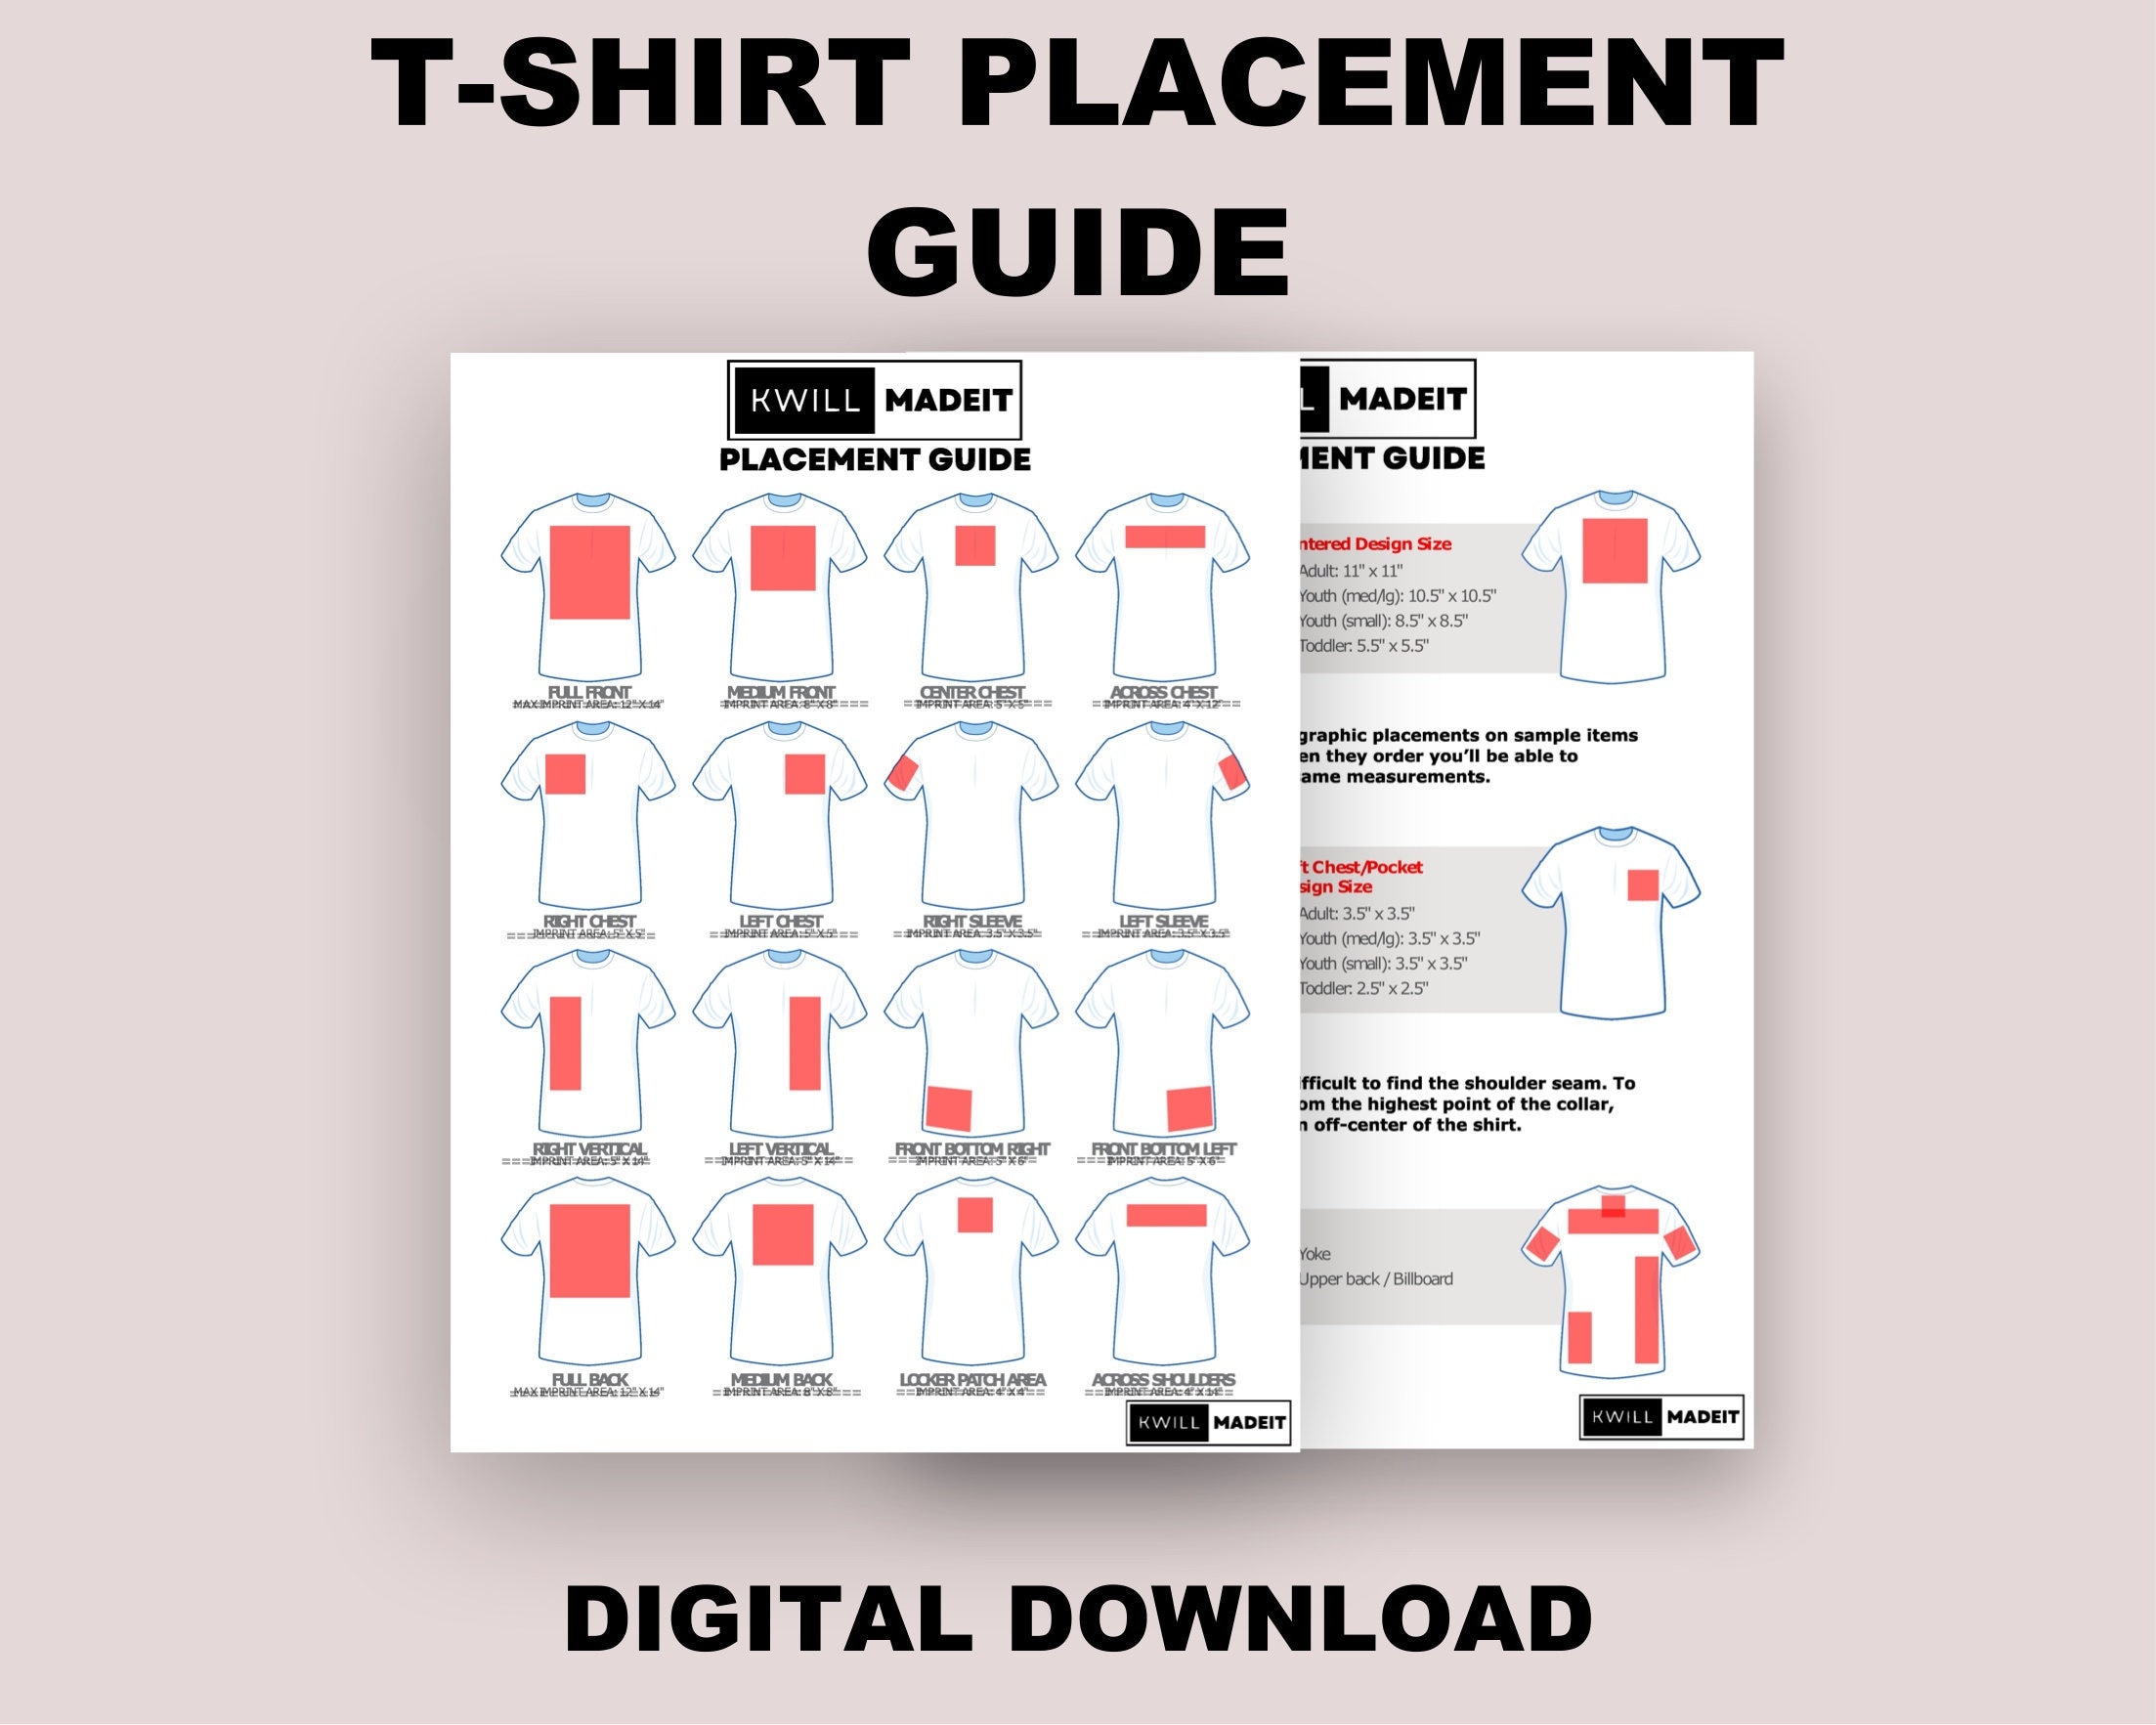 T-shirt design placement guide for eye-catching shirts